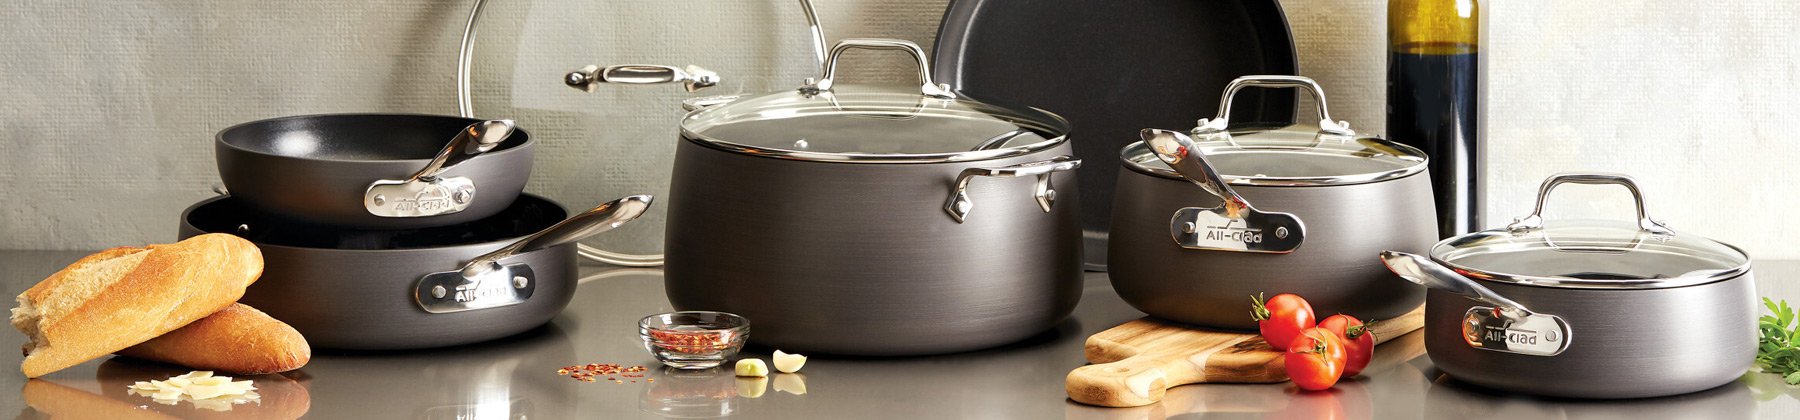 Photo of All-Clad Non-Stick Cookware